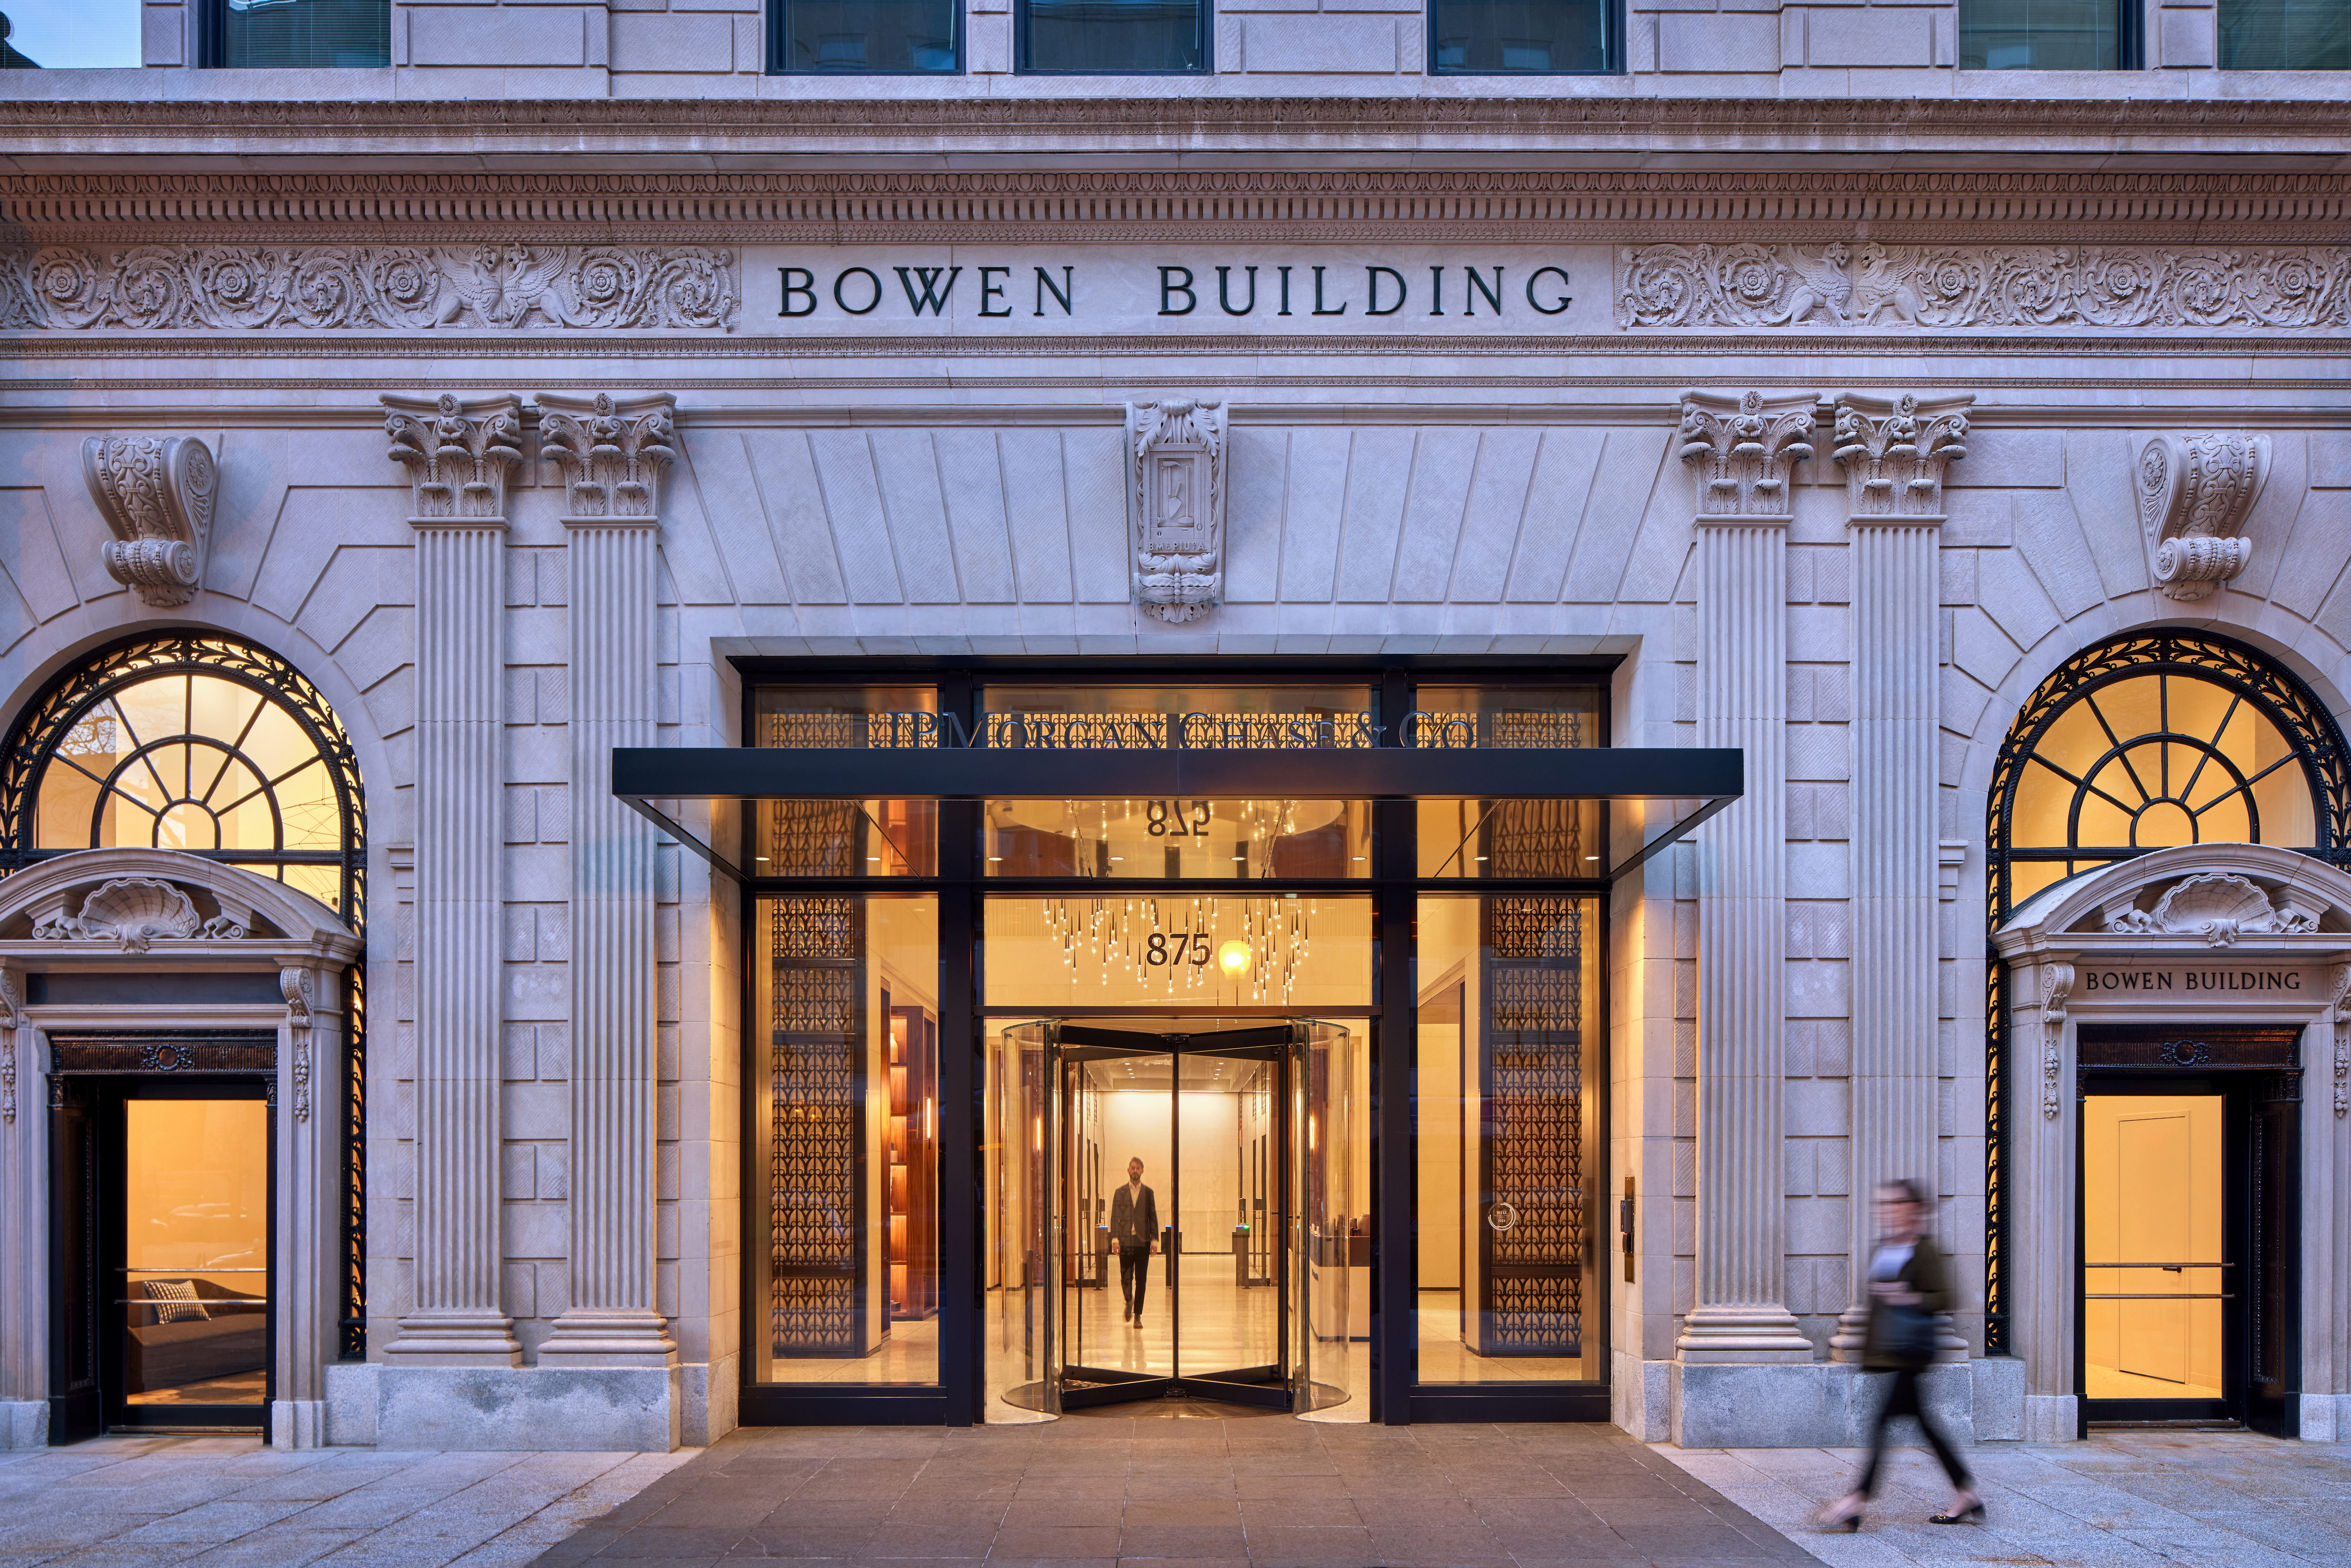 Hines Announces The Square at The Bowen Building in Washington D.C.